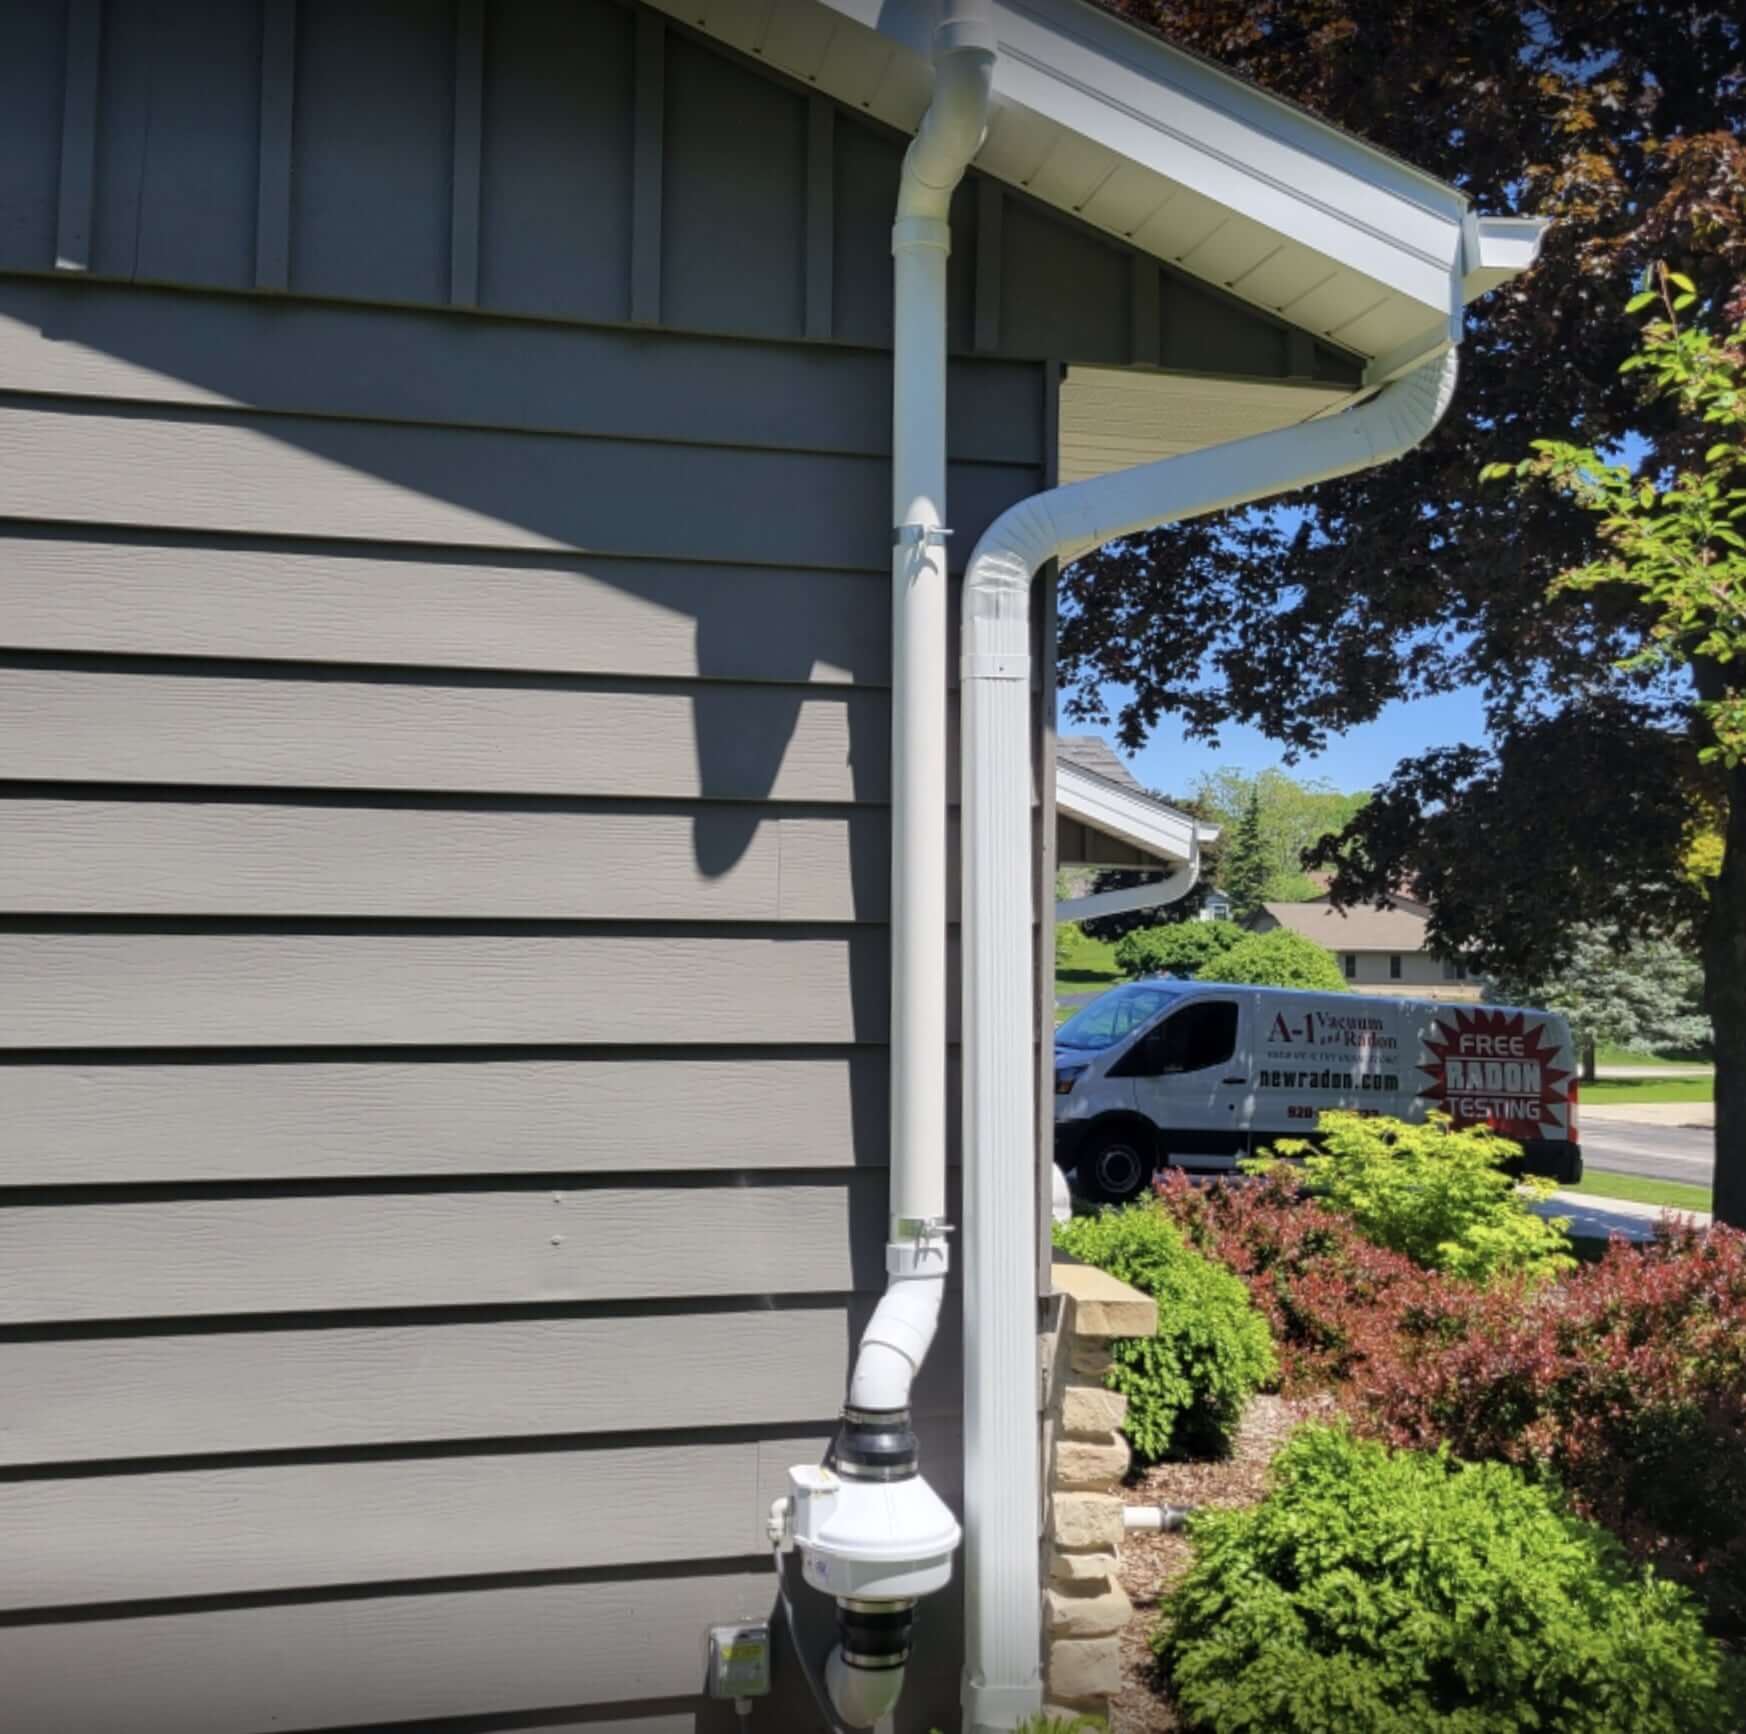 Radon mitigation system expertly installed at a local home, with visible vent pipe and fan ensuring safe removal of radon gas